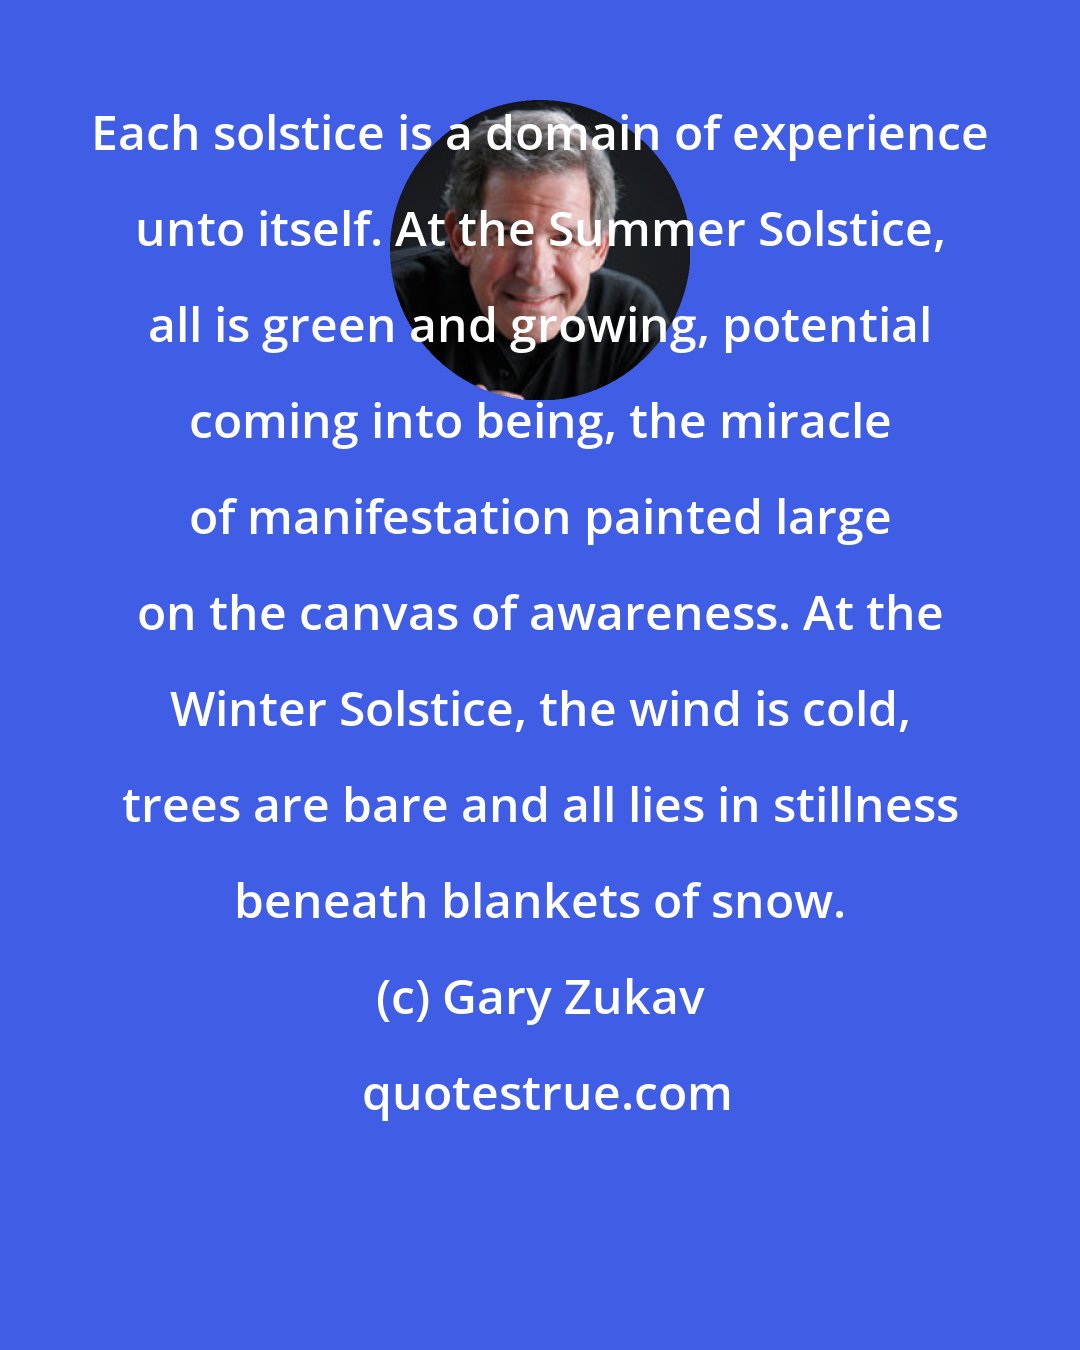 Gary Zukav: Each solstice is a domain of experience unto itself. At the Summer Solstice, all is green and growing, potential coming into being, the miracle of manifestation painted large on the canvas of awareness. At the Winter Solstice, the wind is cold, trees are bare and all lies in stillness beneath blankets of snow.